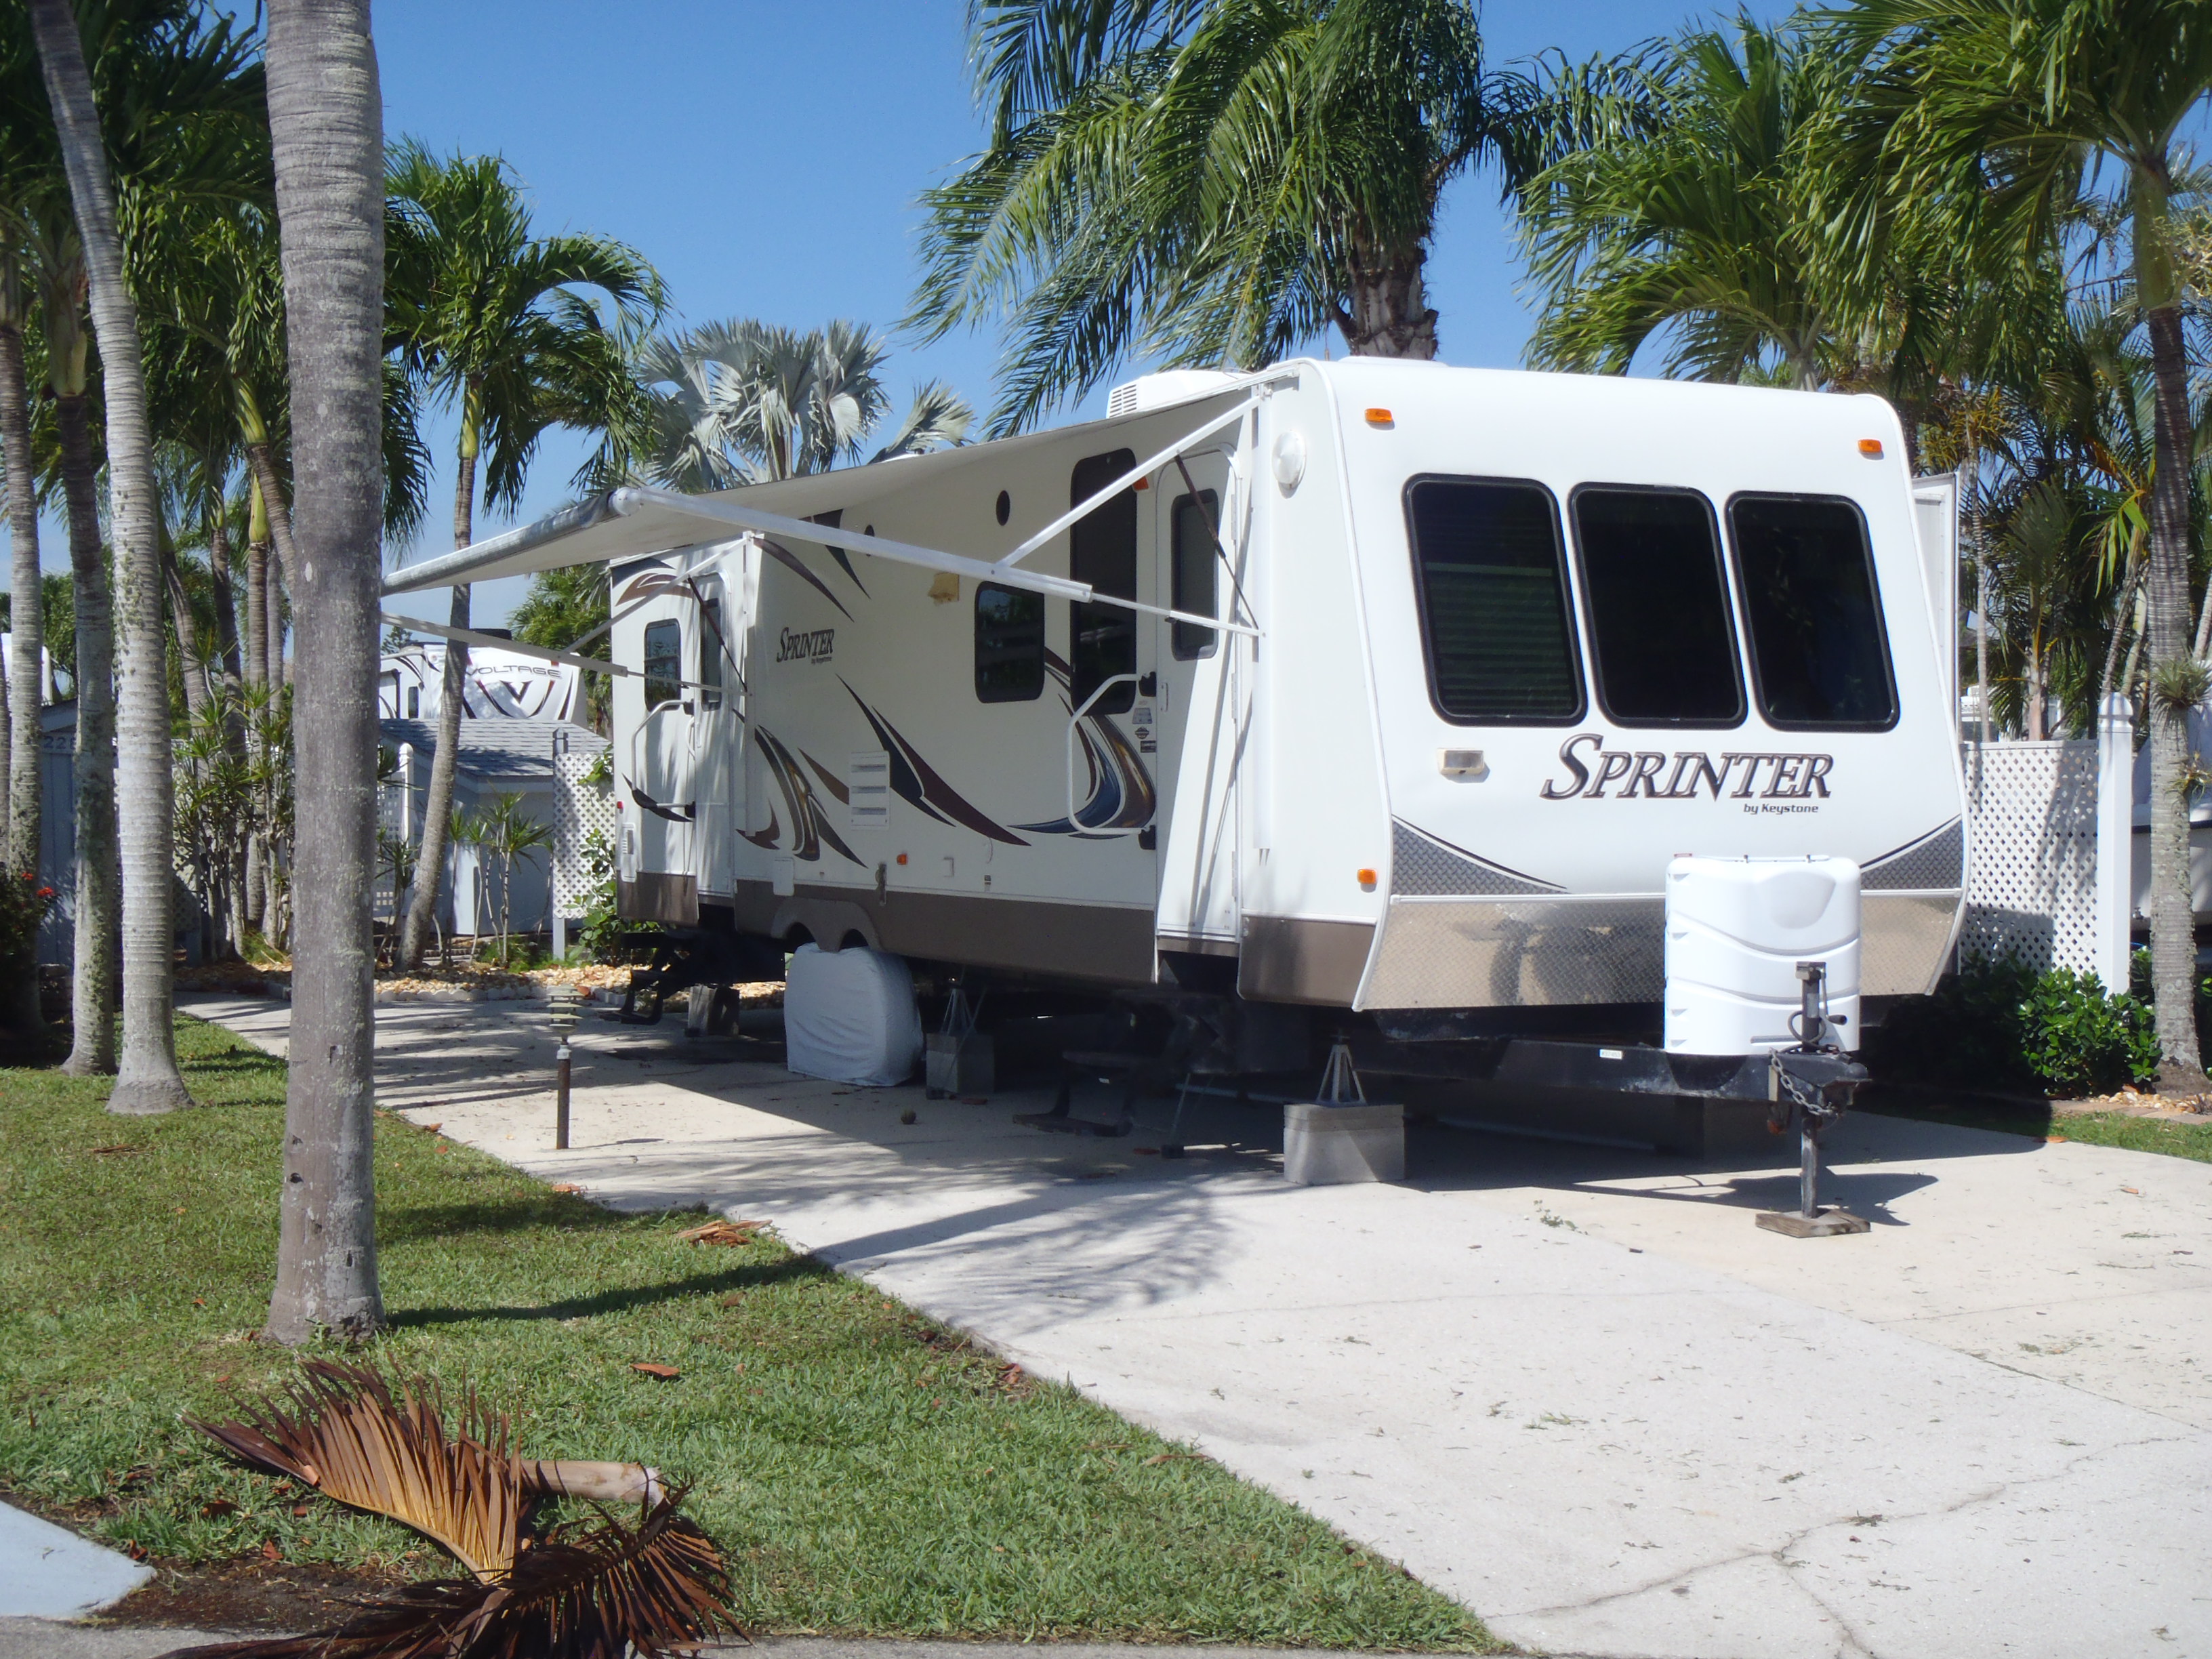 Florida Lots For Sale Page N-3 - RV Property RV Property